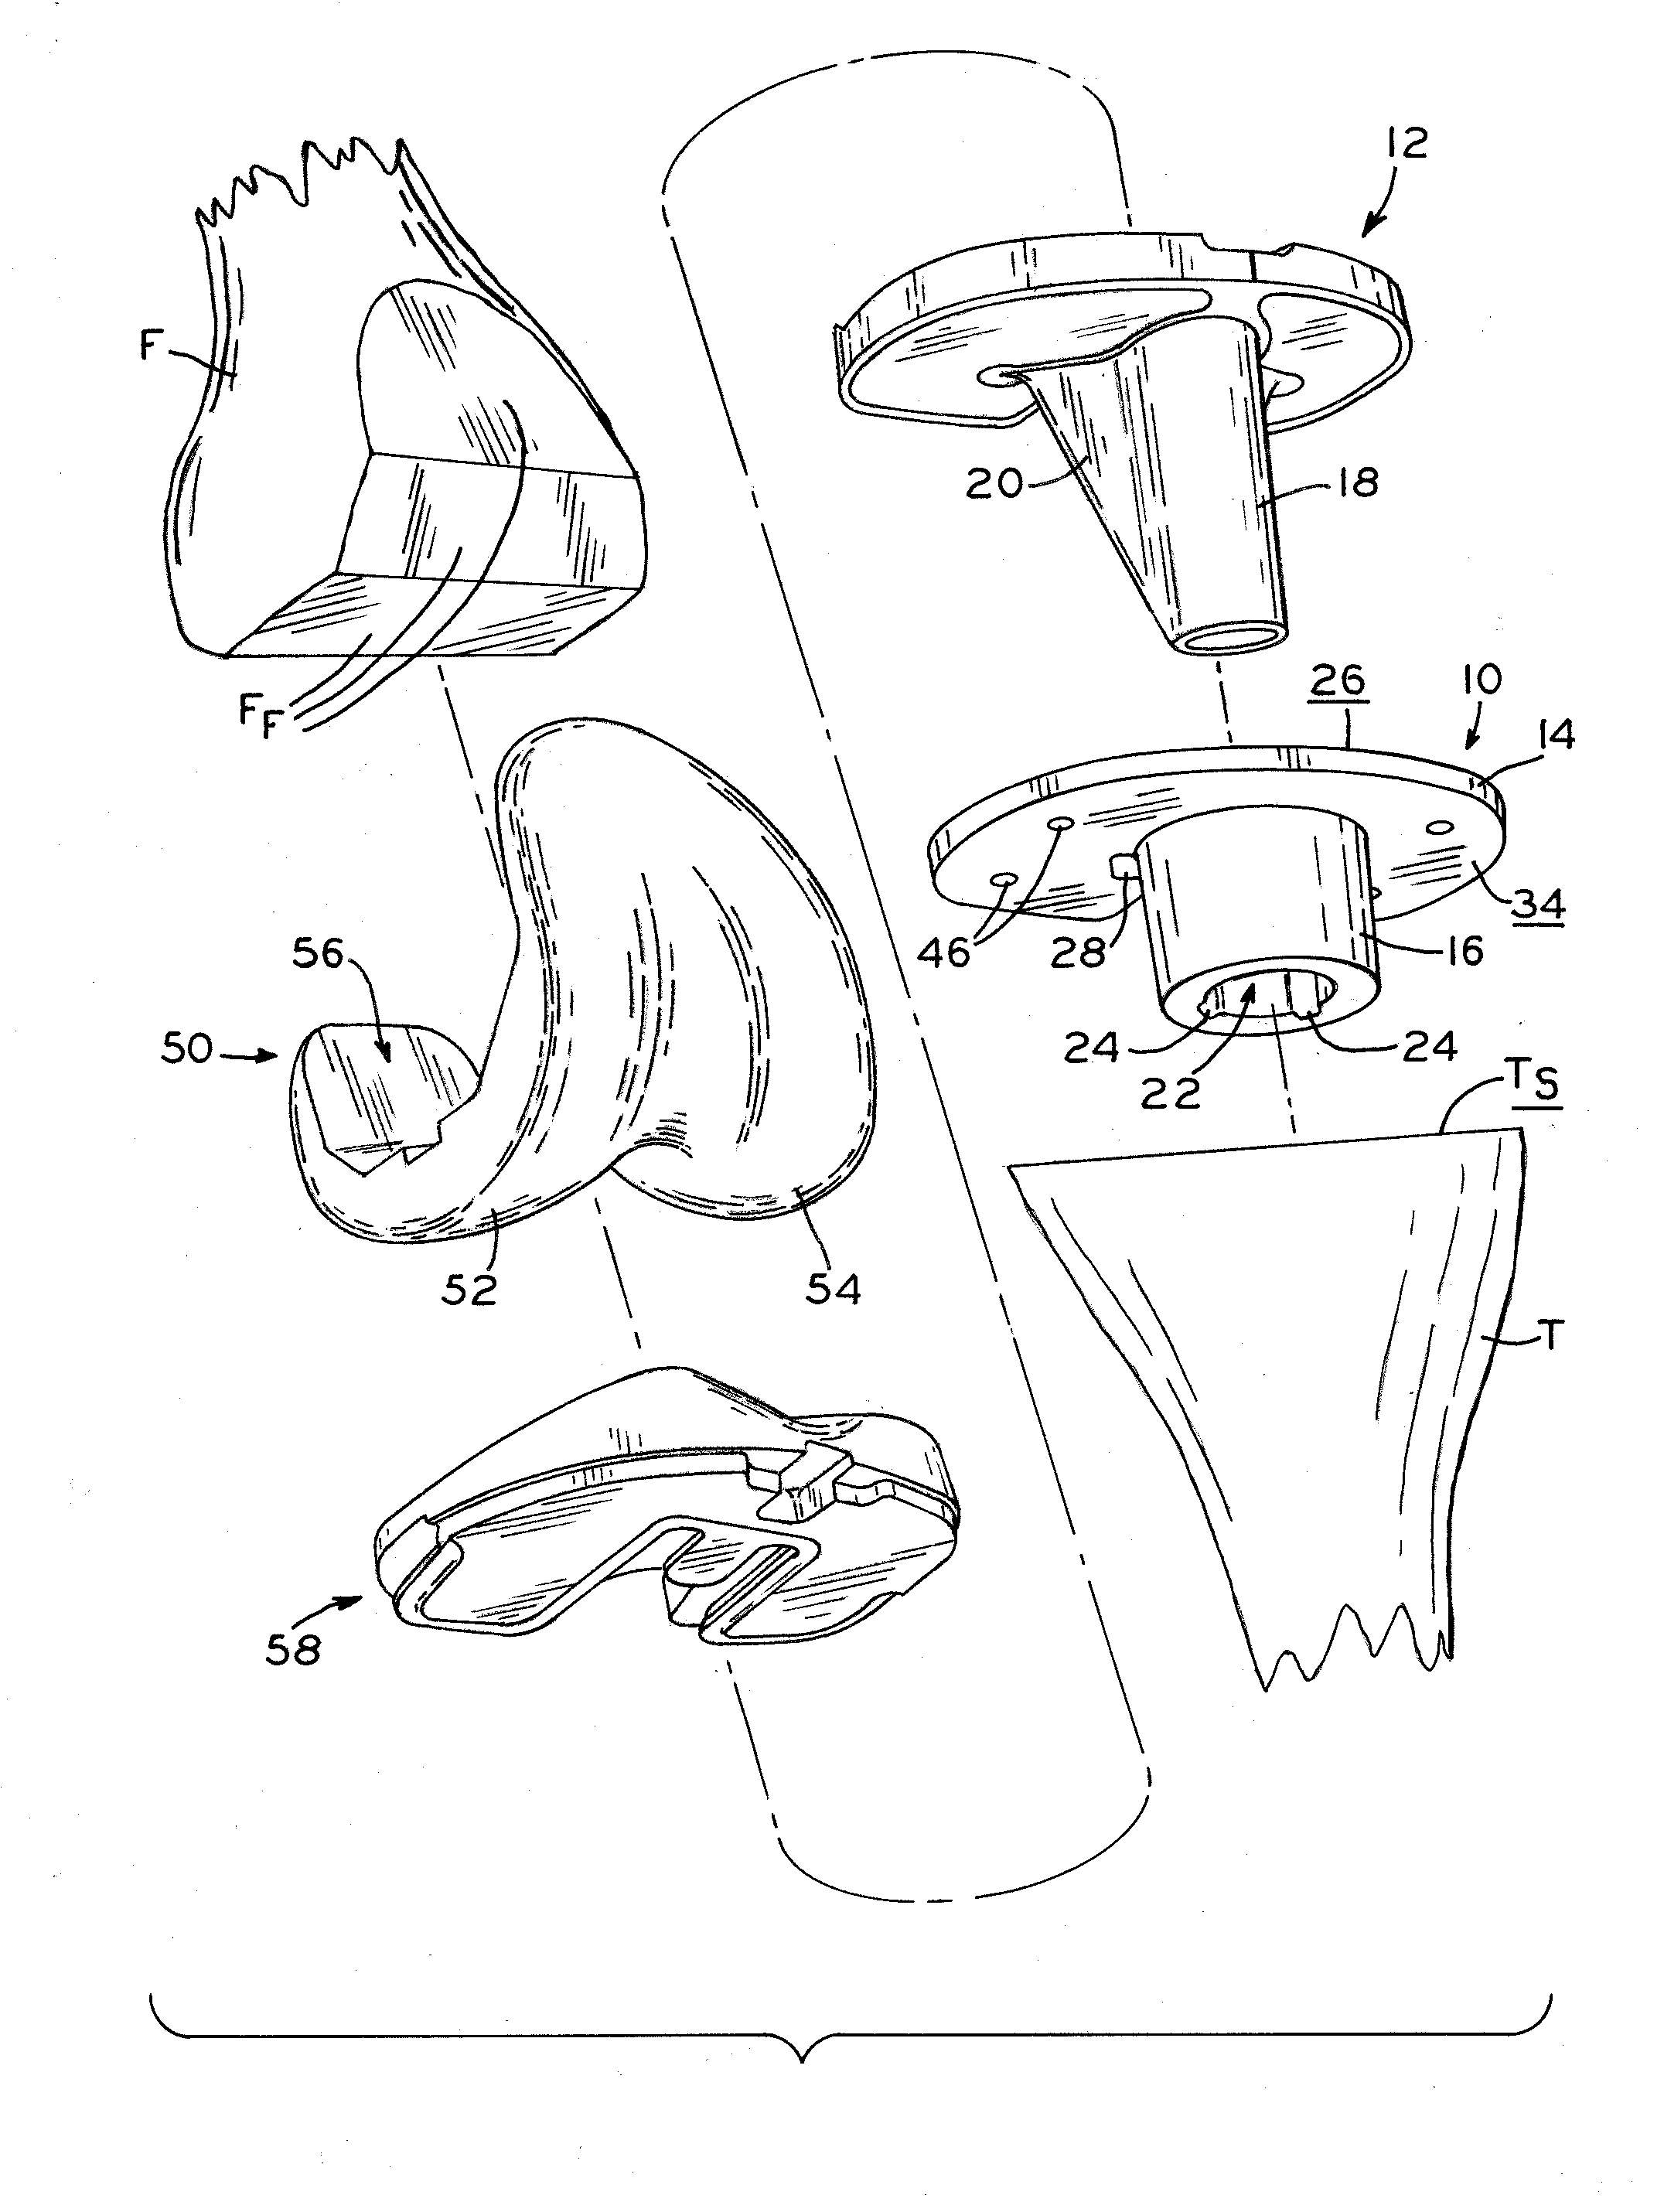 Stabilizing prosthesis support structure